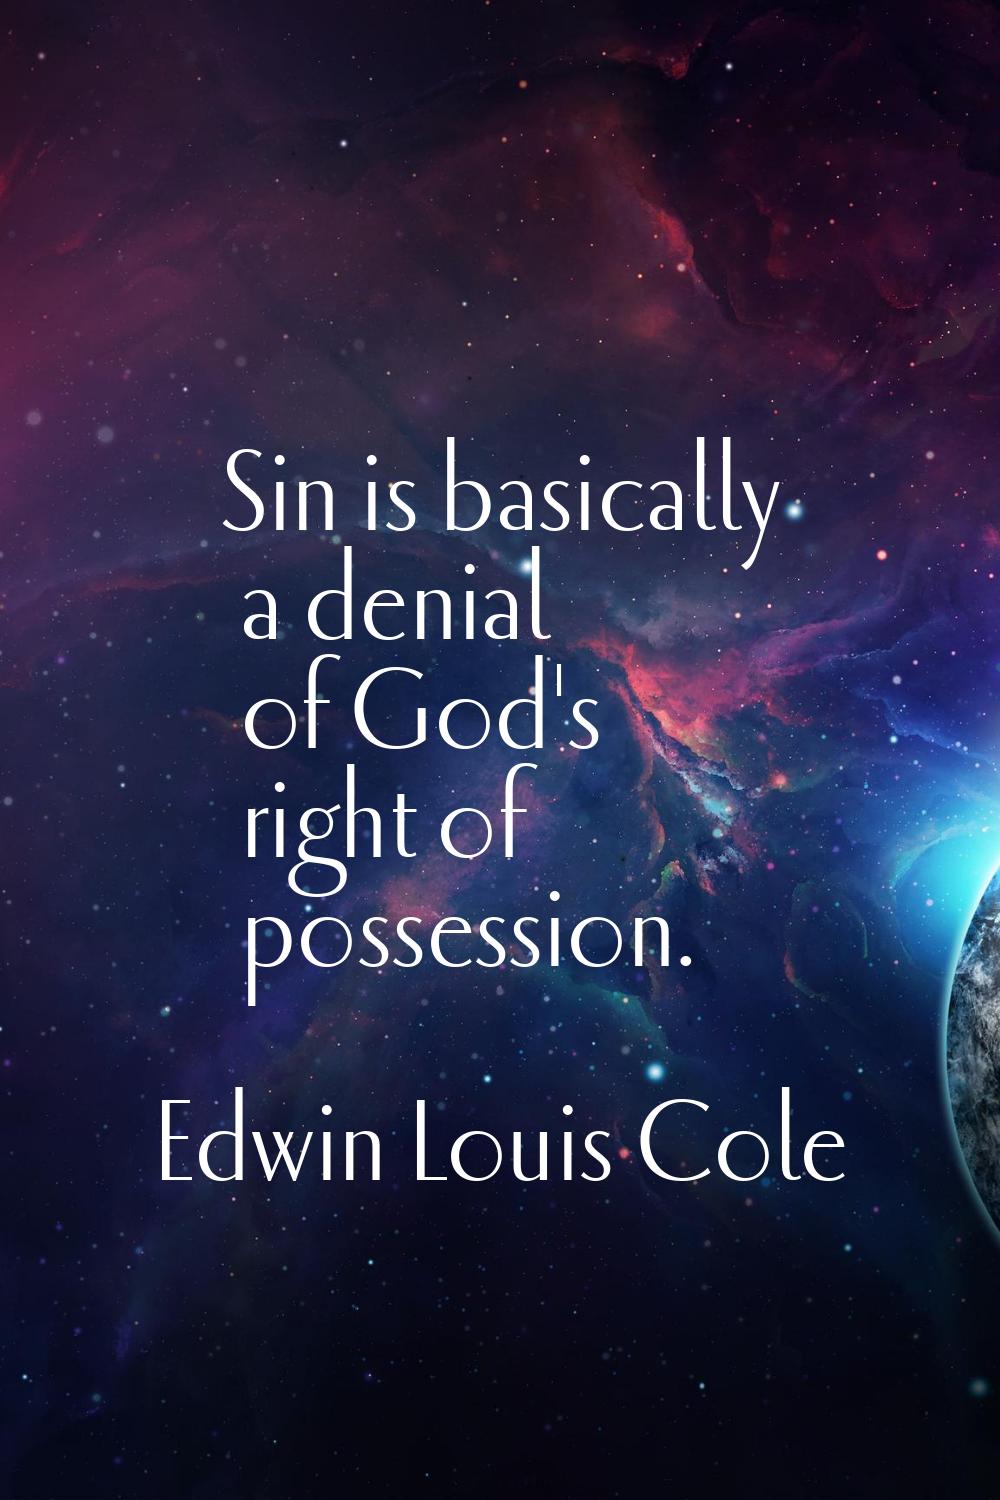 Sin is basically a denial of God's right of possession.